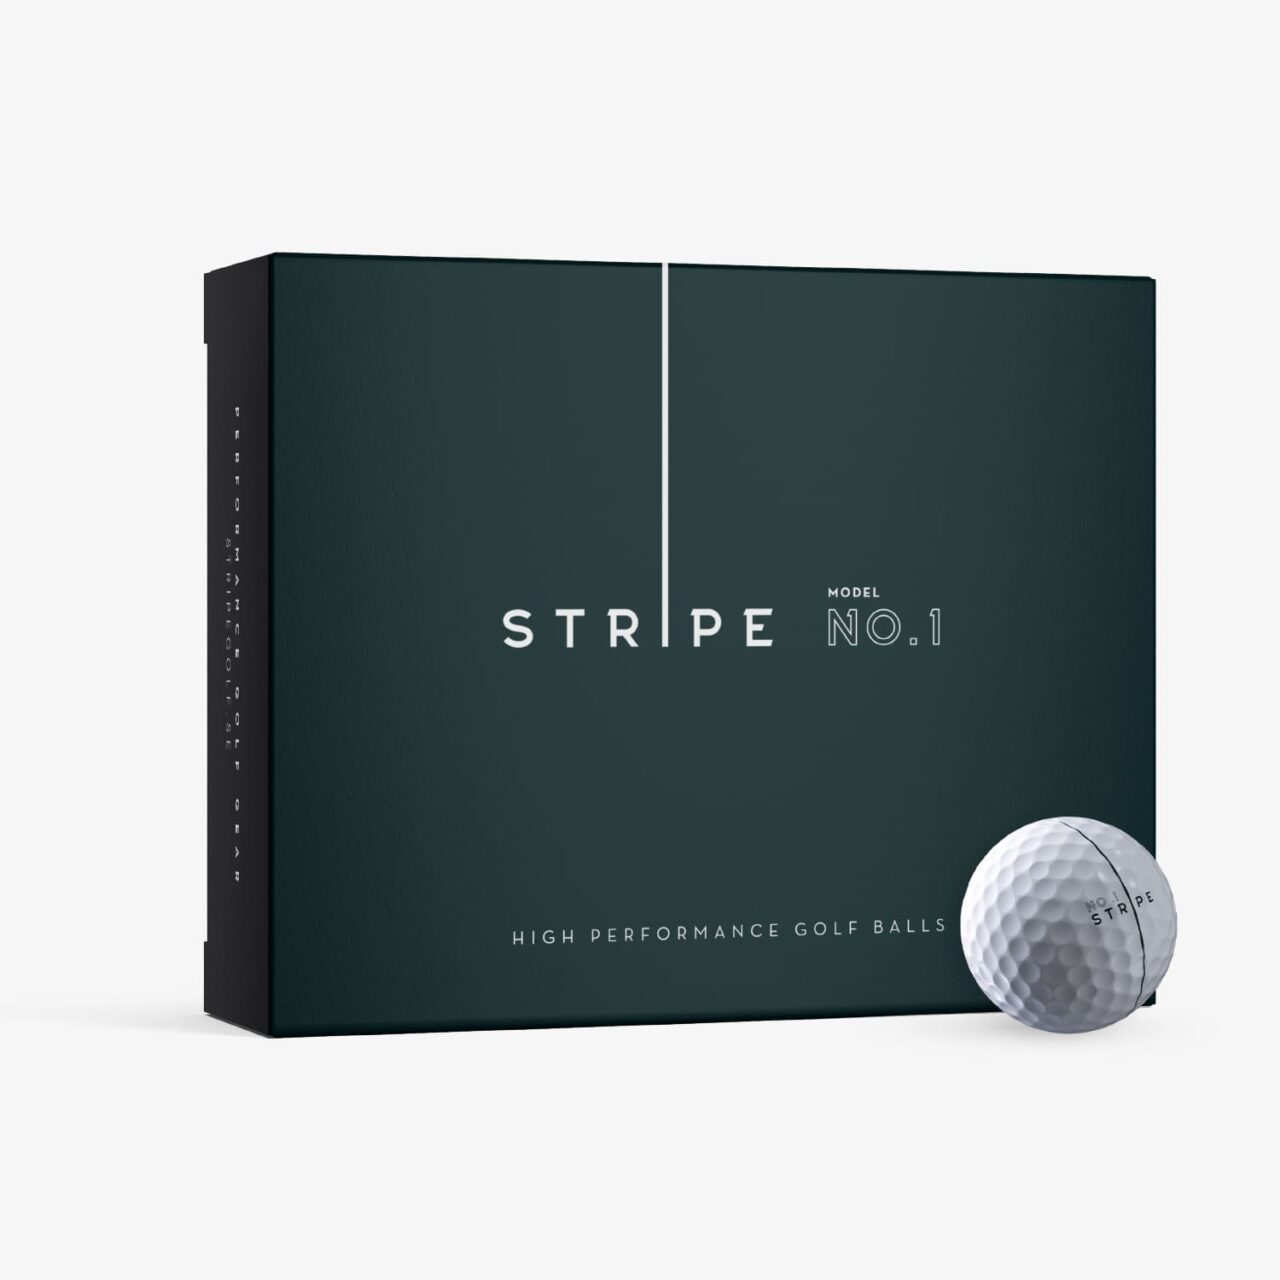 Golf ball model No1 with standing box